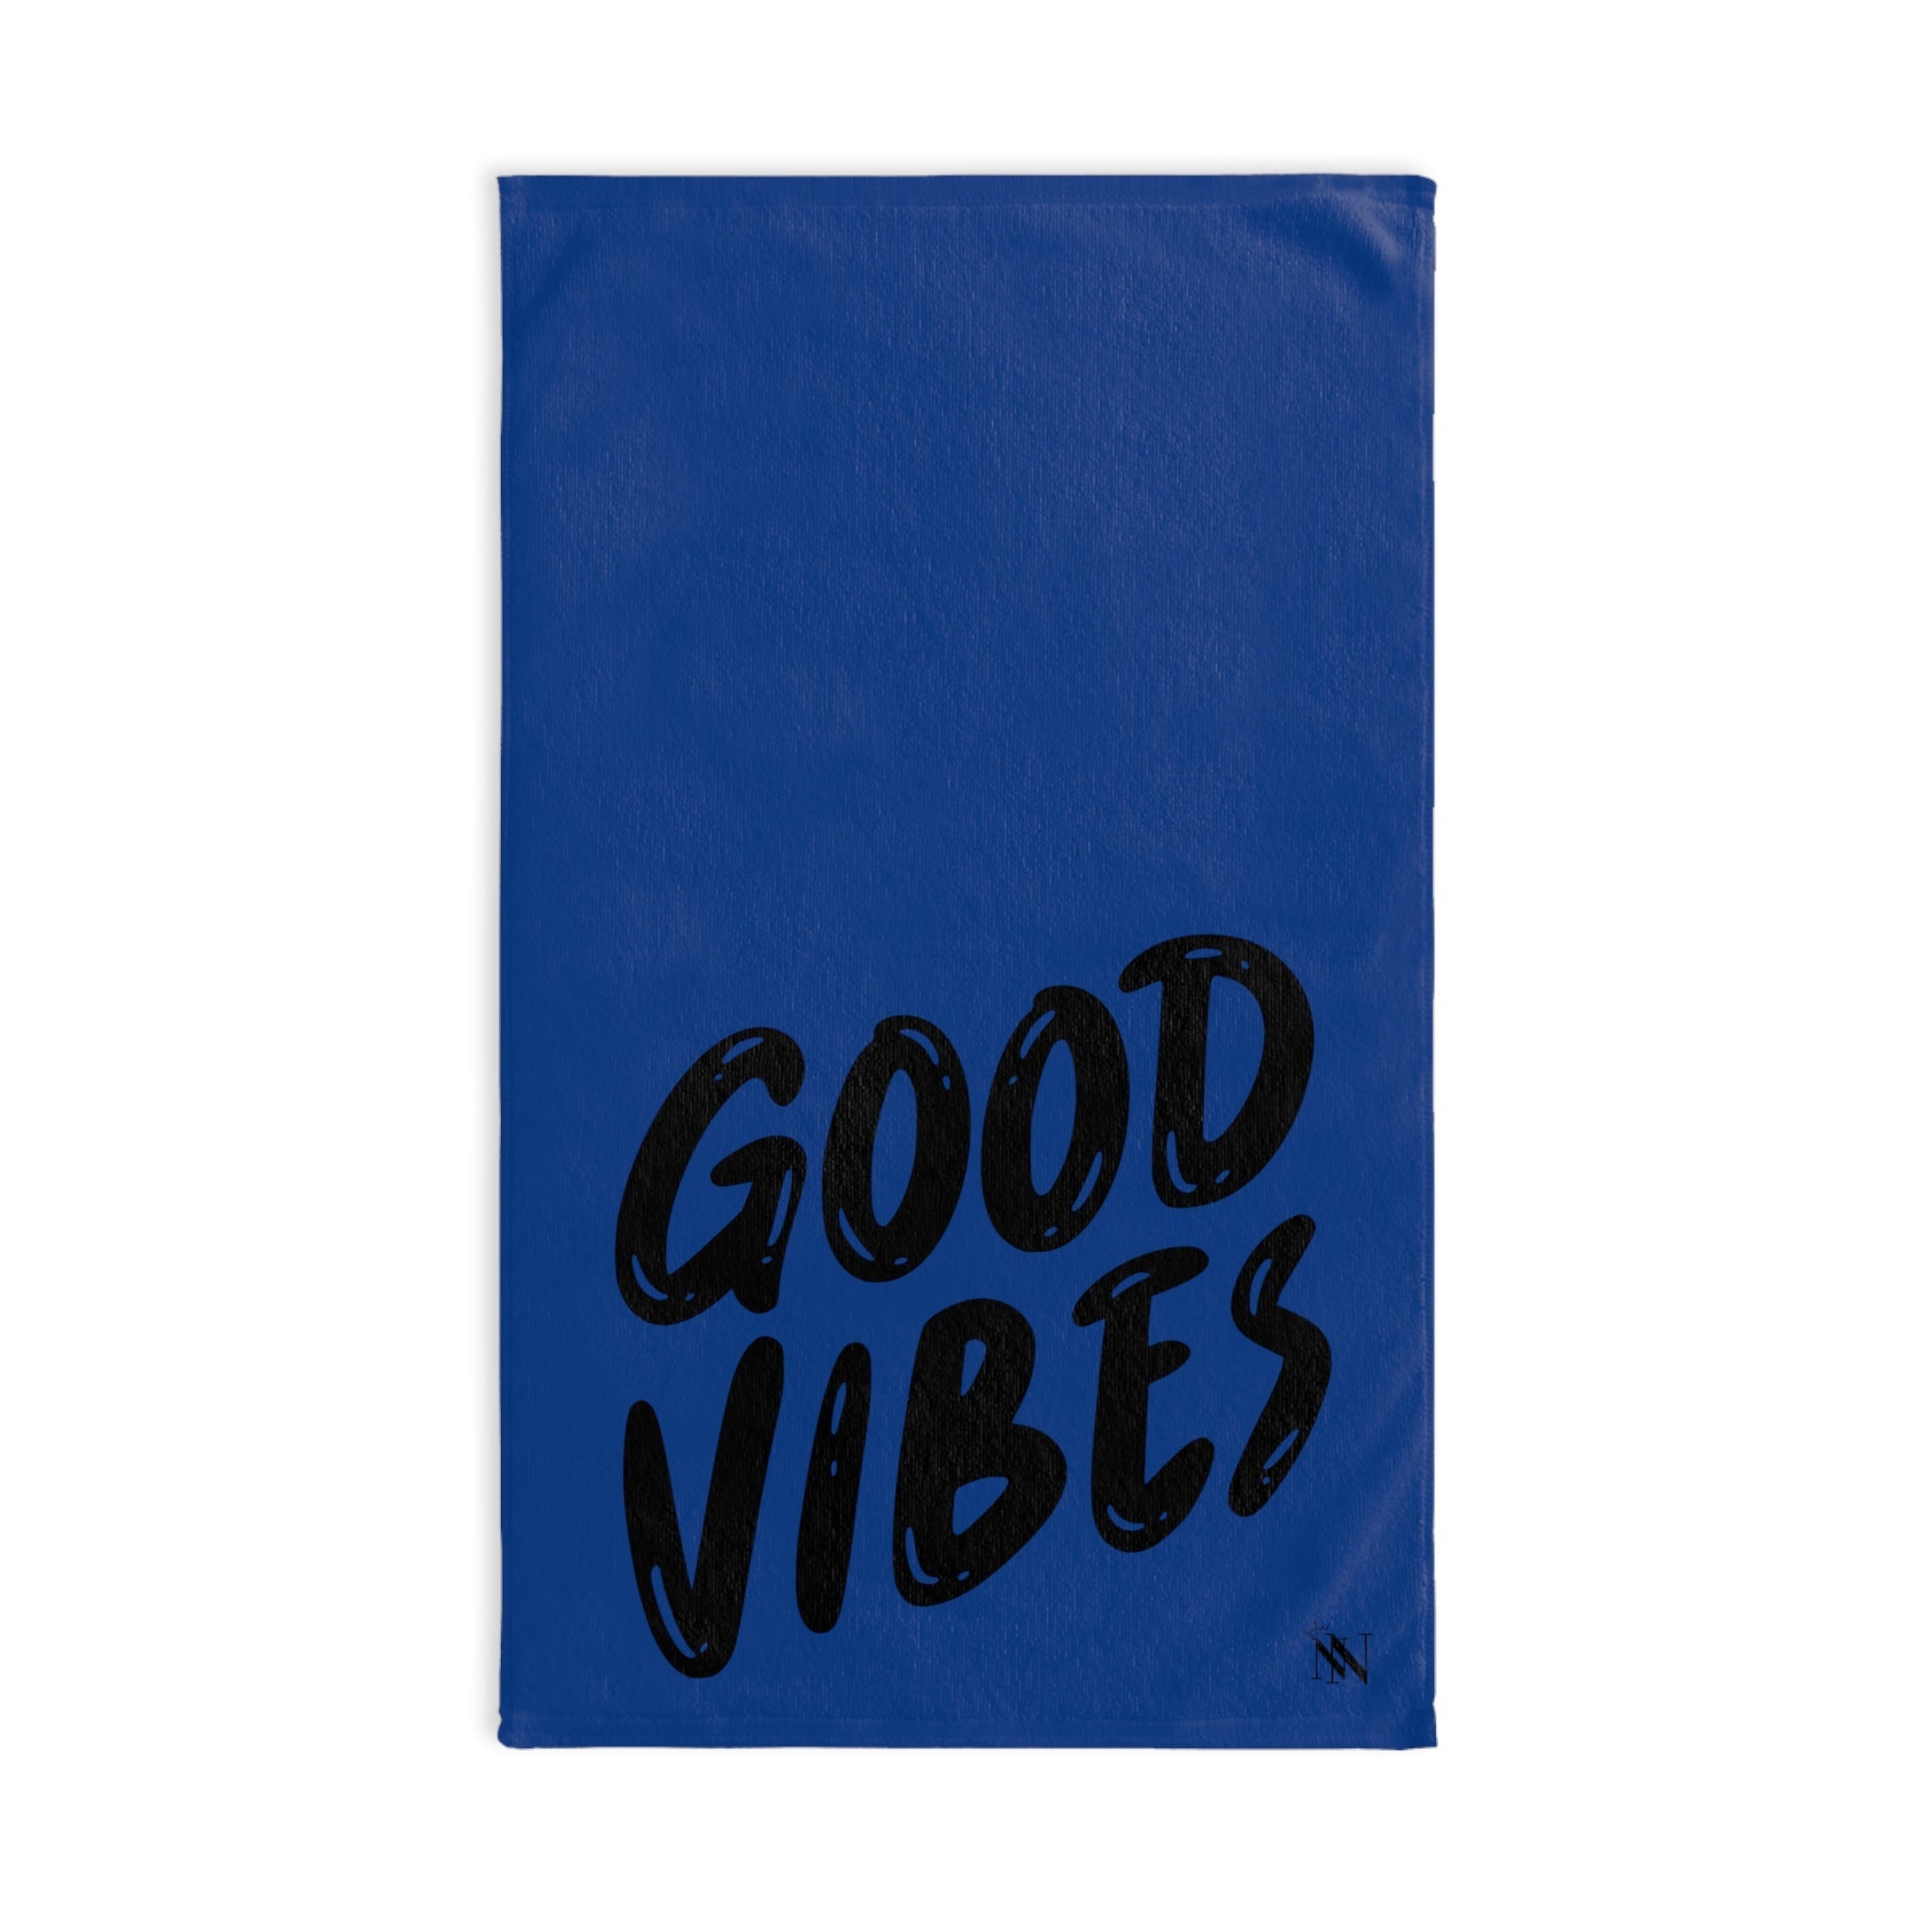 Good Vibes Bubble Blue | Gifts for Boyfriend, Funny Towel Romantic Gift for Wedding Couple Fiance First Year Anniversary Valentines, Party Gag Gifts, Joke Humor Cloth for Husband Men BF NECTAR NAPKINS